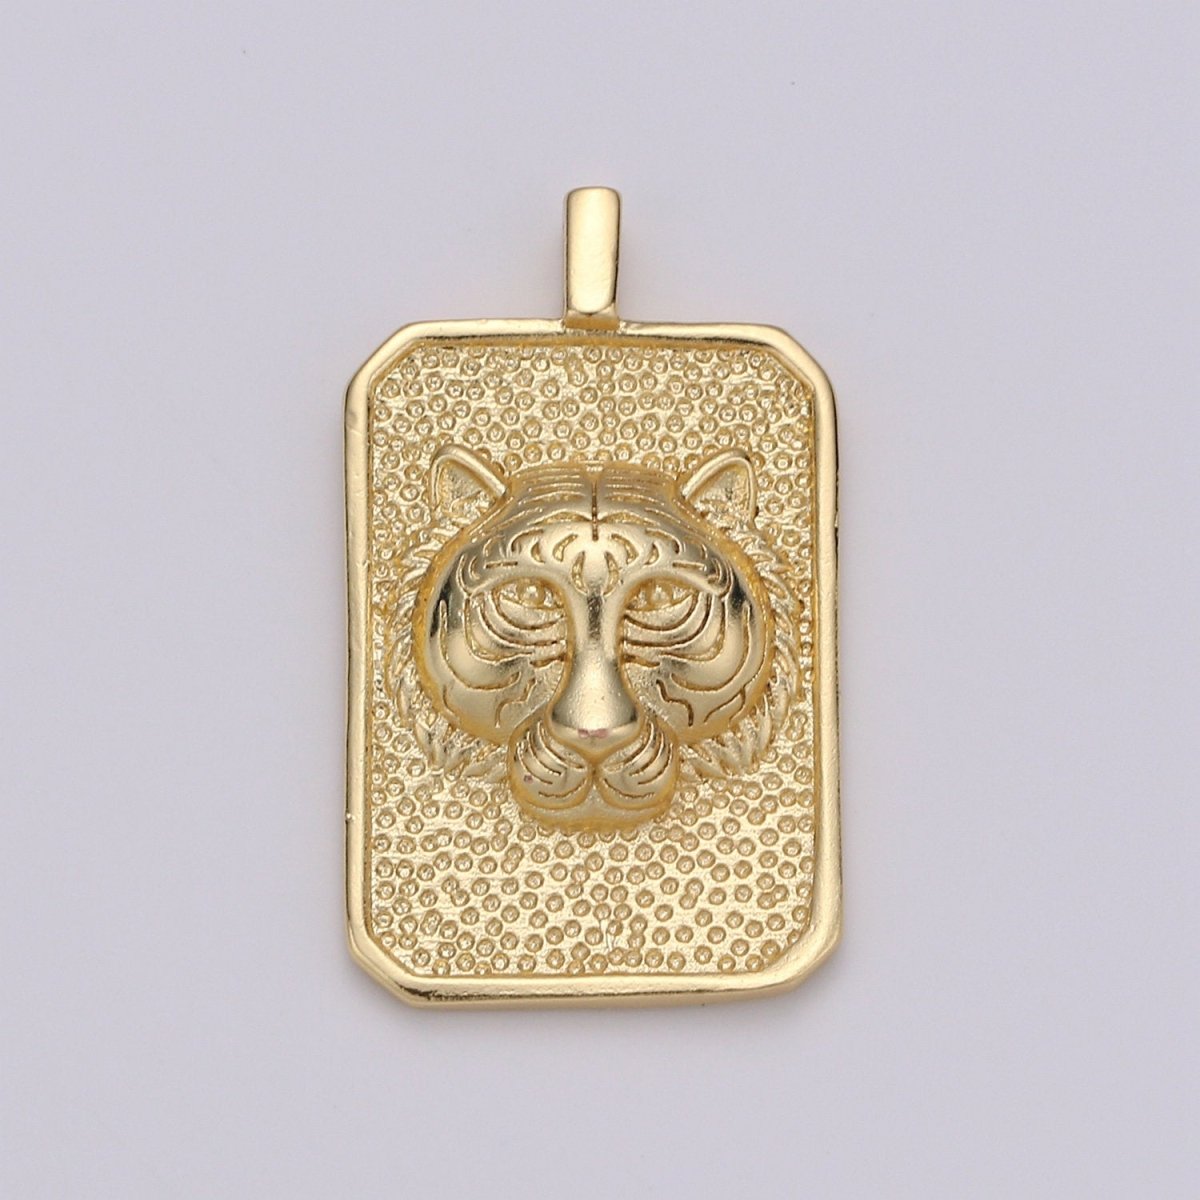 Gold Tag Tiger Charm Gold Filled Medallion, Tiger King Pendant Animal Necklace Charm for Statement Necklace Component Men Unisex Jewelry J-024 - DLUXCA